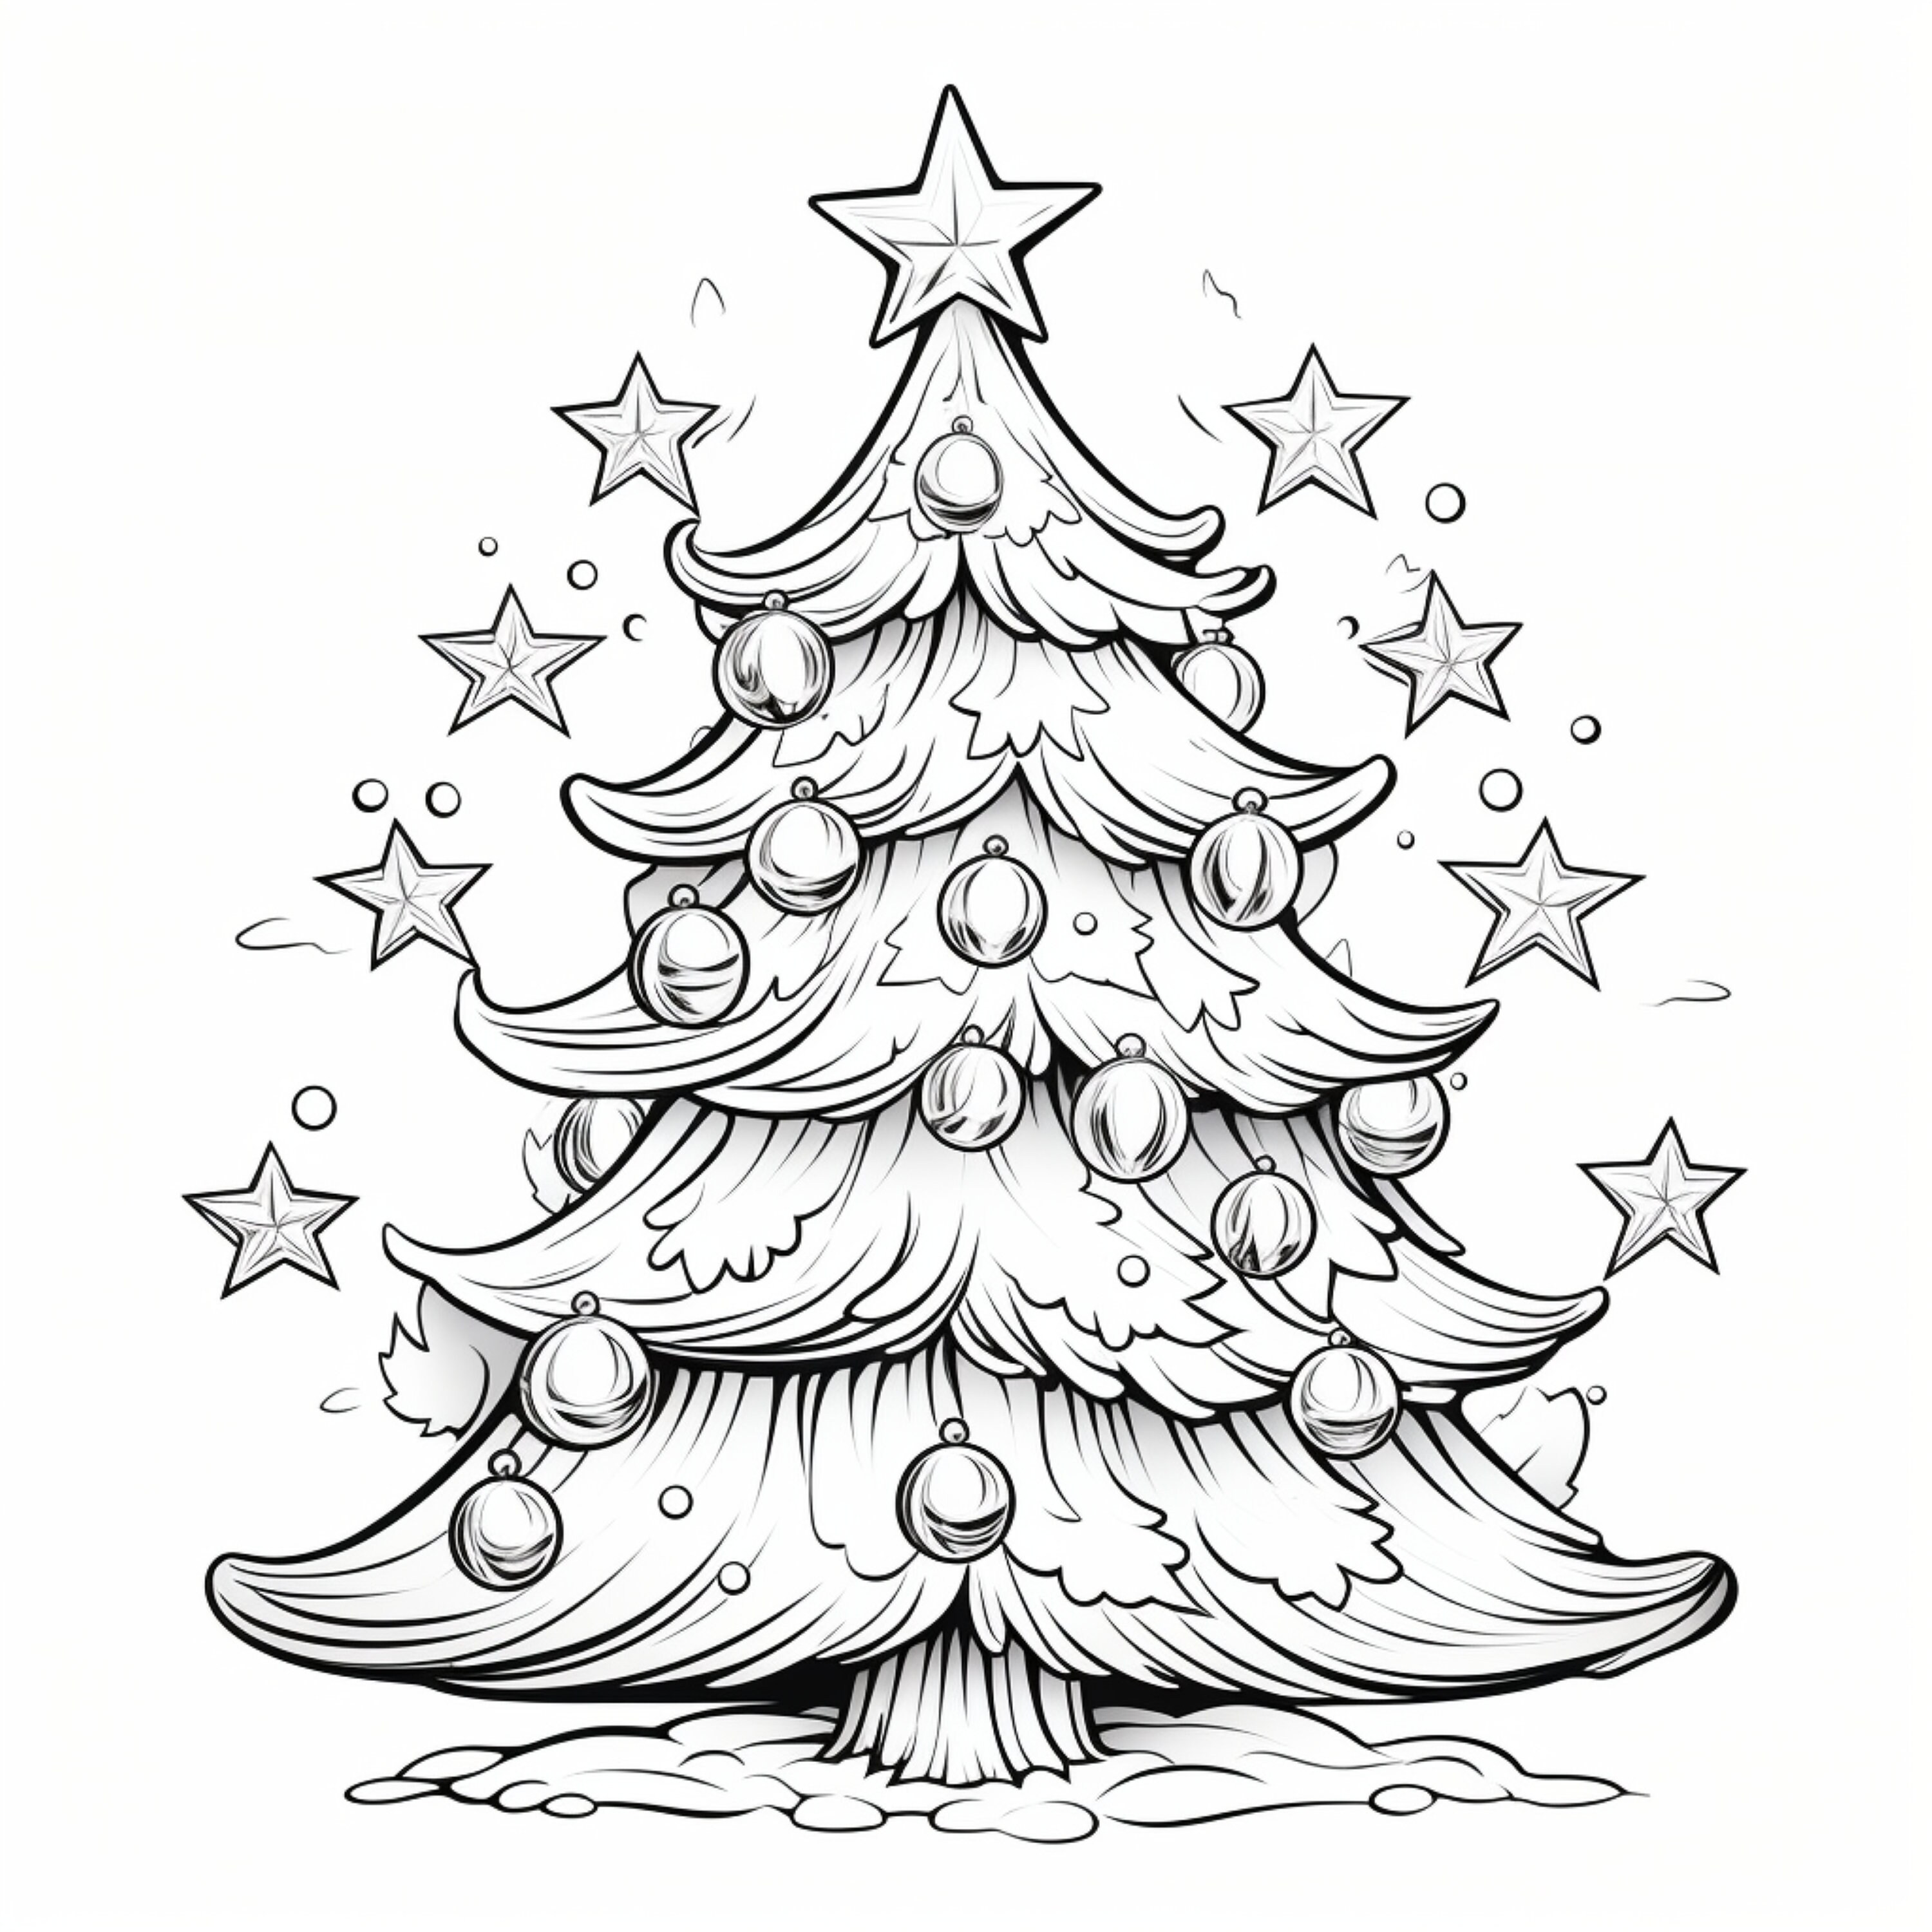 Winter/christmas 1 Coloring Pages 5 - Etsy